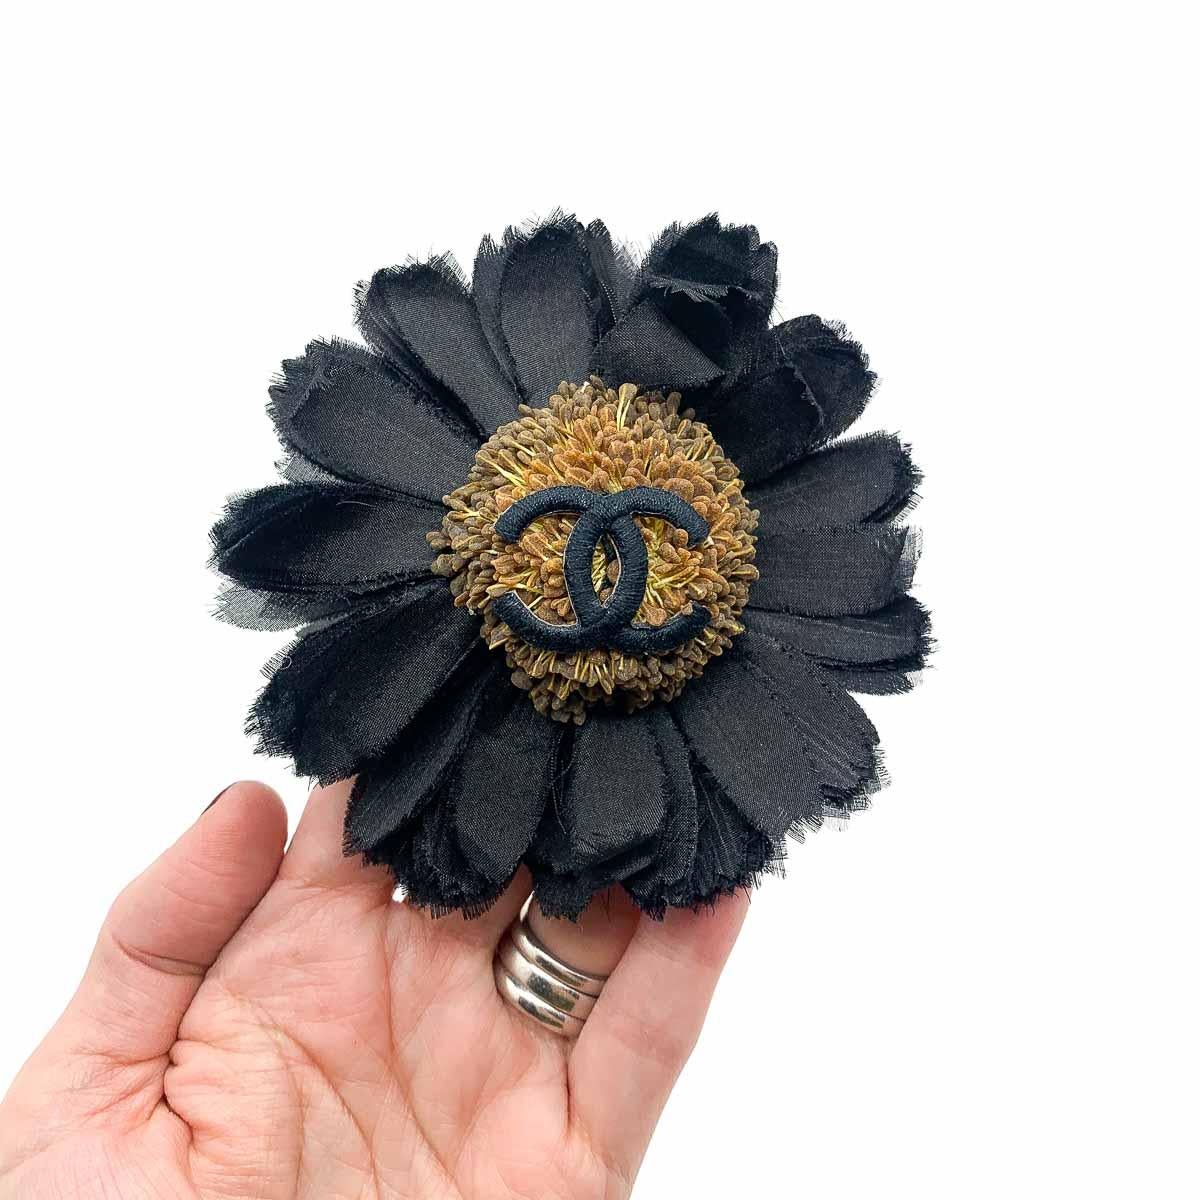 A striking Vintage Chanel Sunflower Brooch from the 1980s. Featuring a large sunflower style design with the iconic CC logo at it's heart. The design most likely inspired by Coco Chanel's love of flowers and all things celestial. Crafted